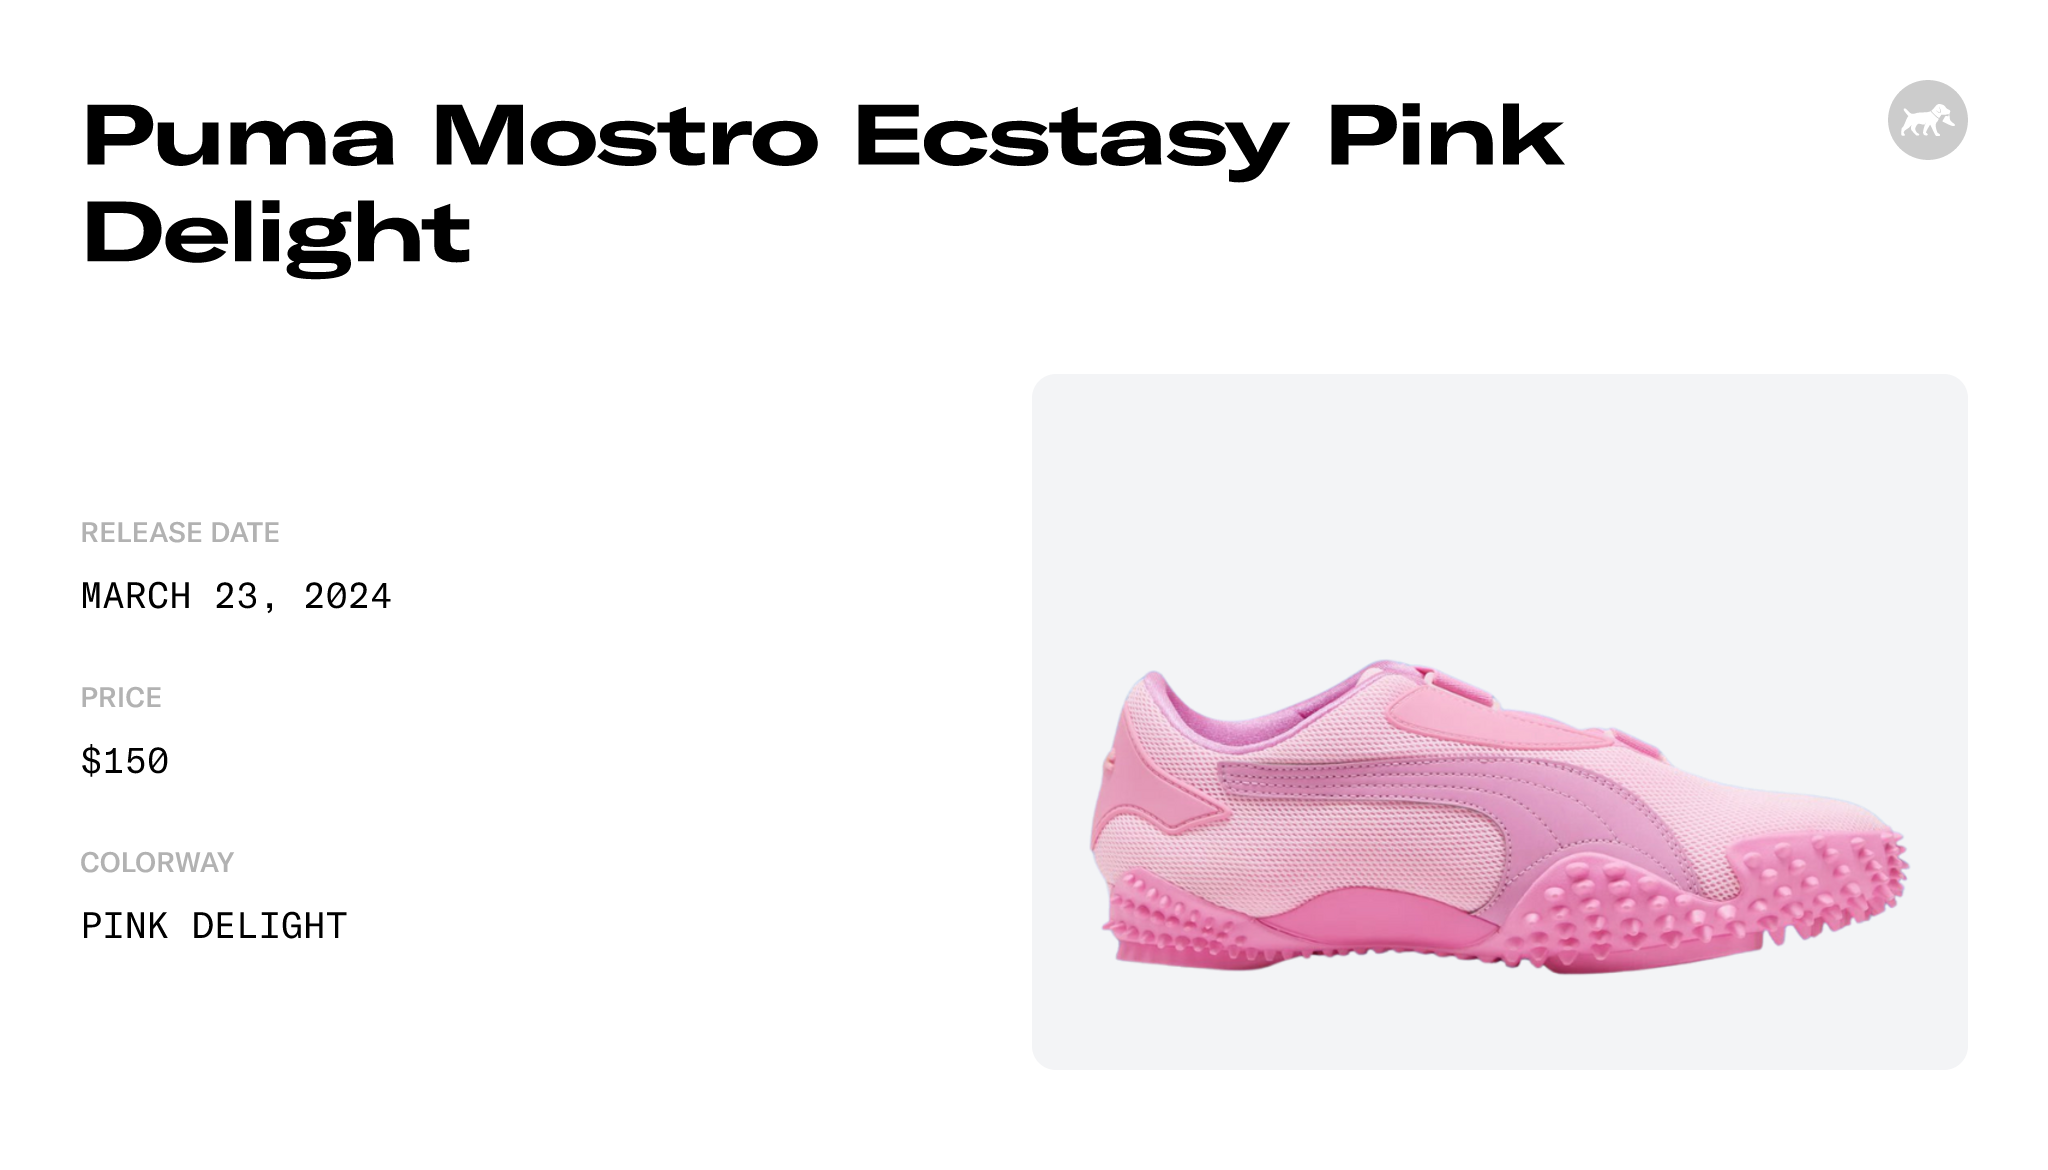 Puma Mostro Ecstasy Pink Delight - 397328-01 Raffles and Release Date